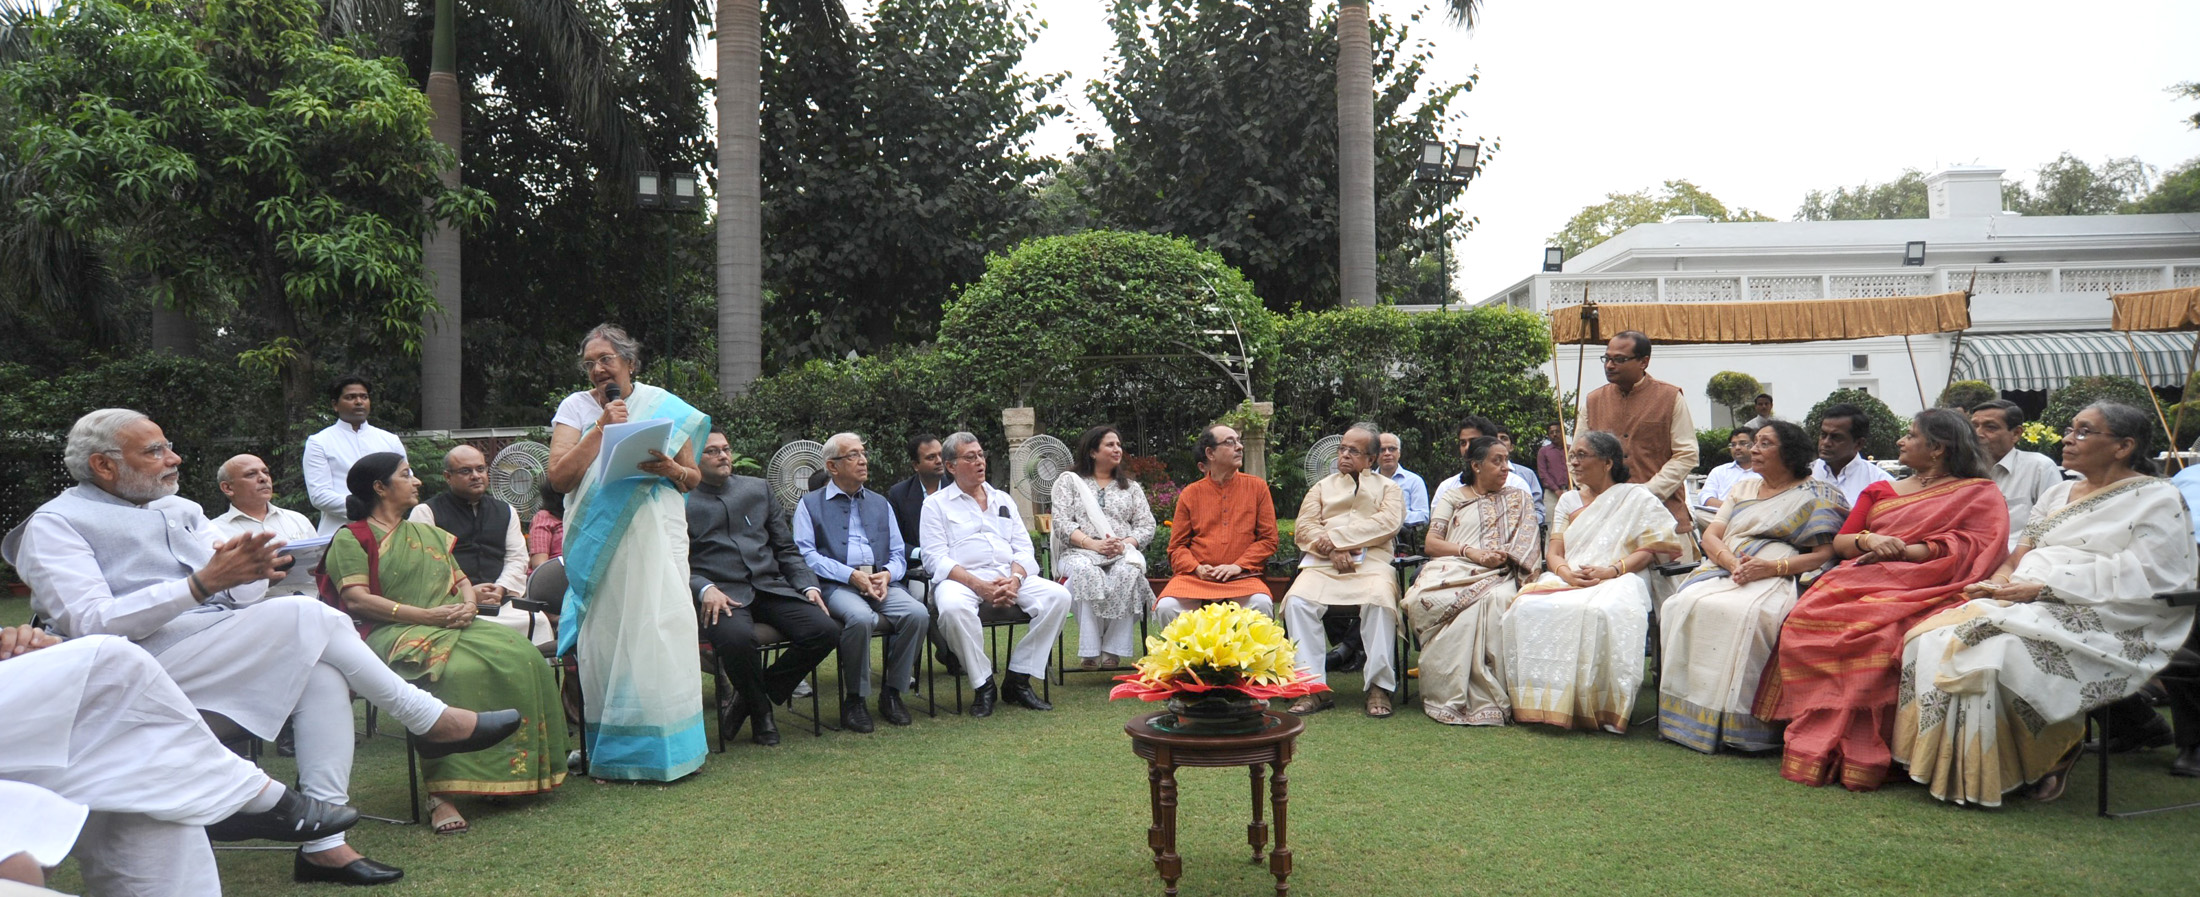 The Prime Minister, Shri Narendra Modi interacting with the family members of Netaji Subhas Chandra Bose, at 7 Race Course Road, in New Delhi on October 14, 2015.